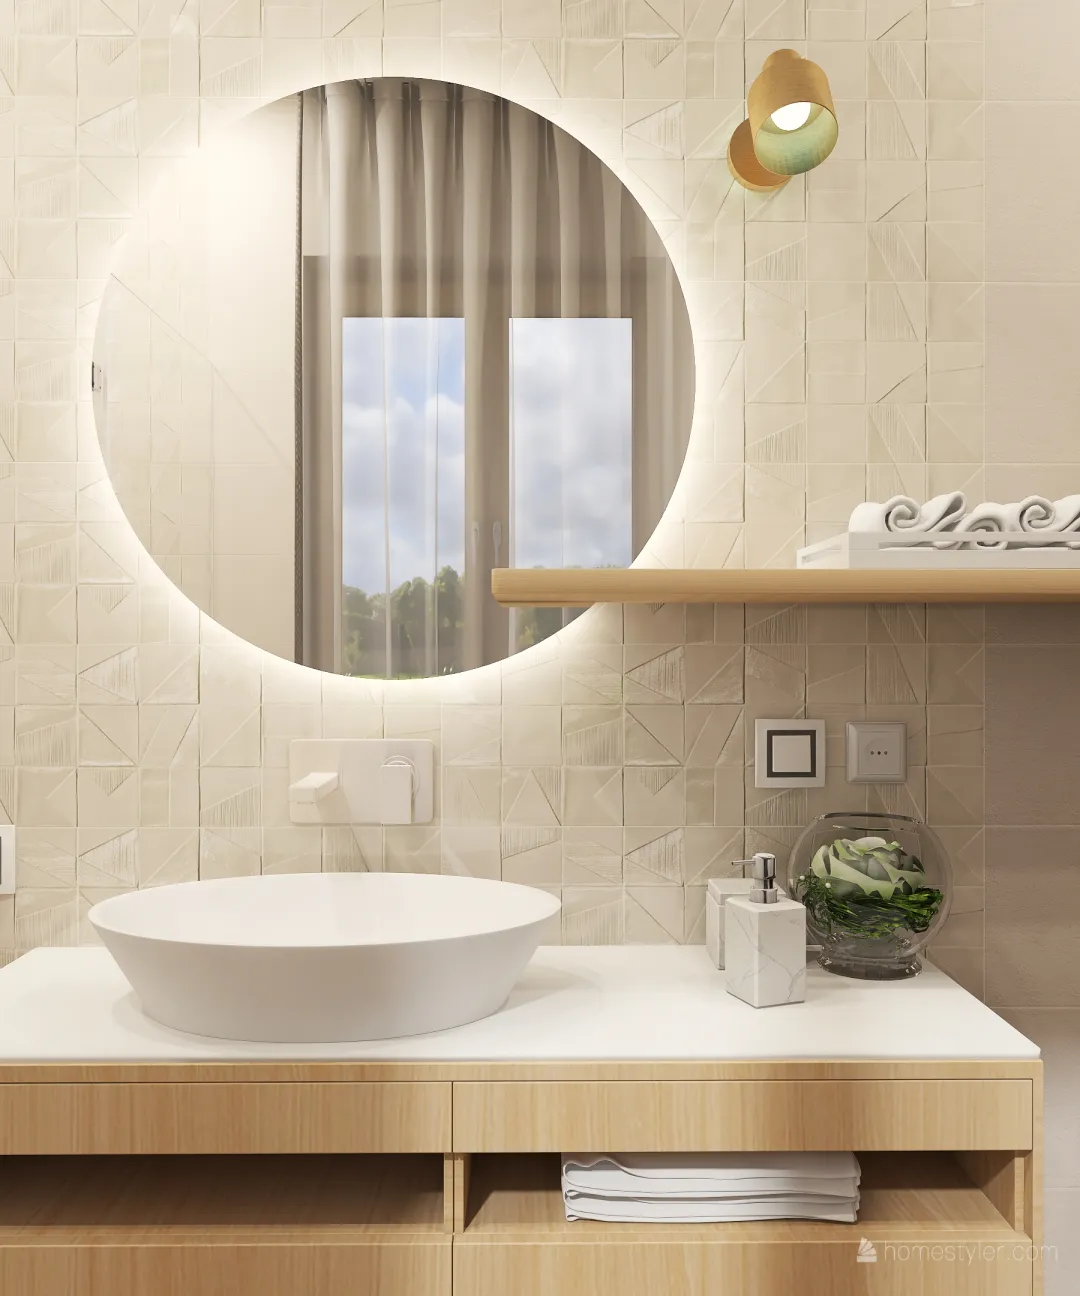 New layout for a small luxury bathroom 3d design renderings